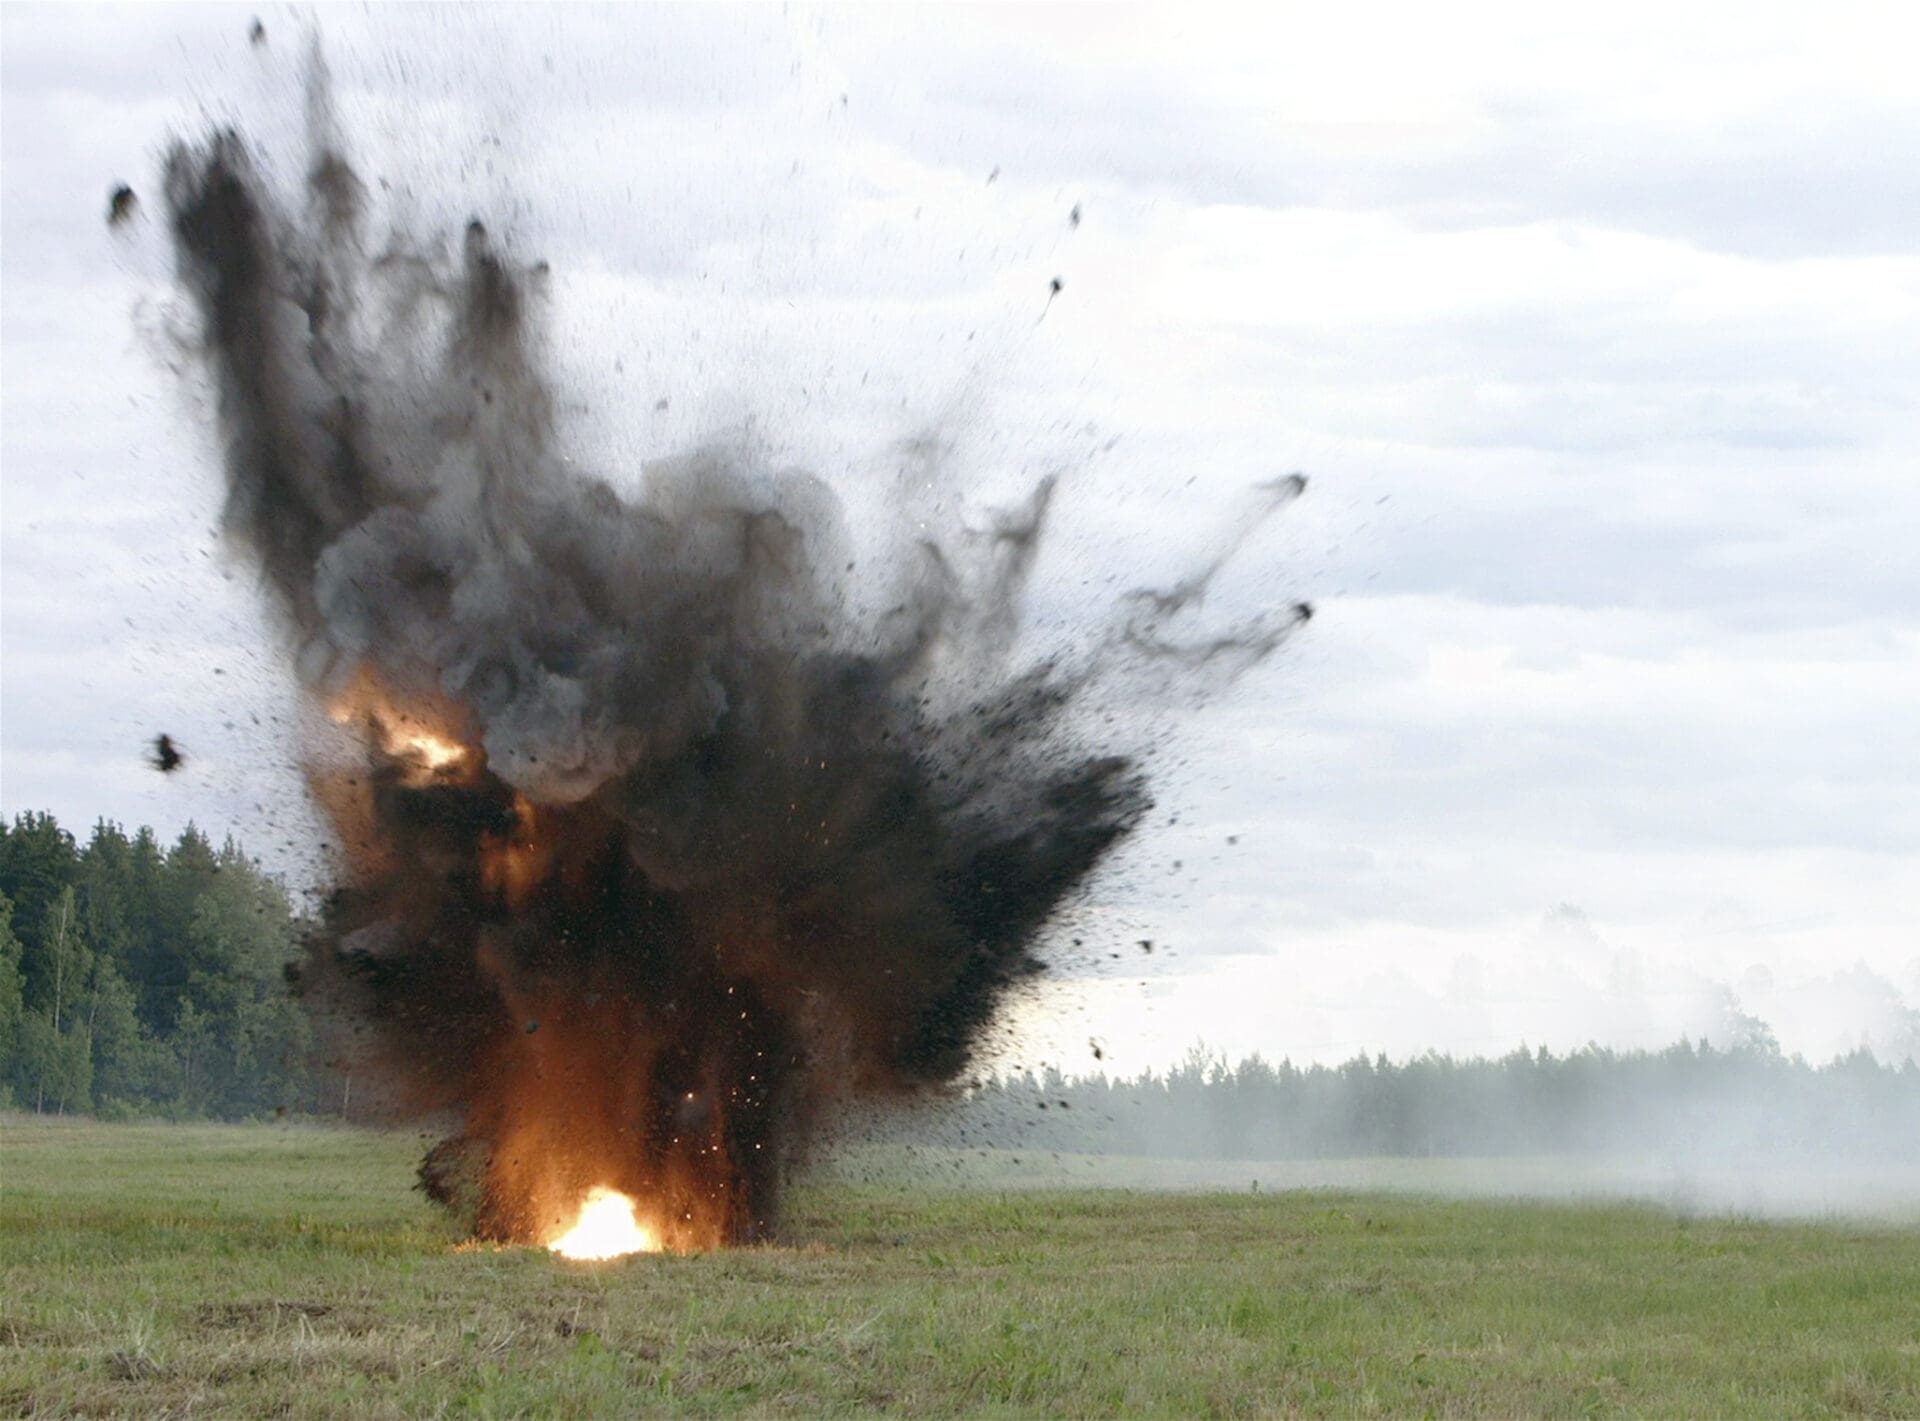 Lawmower Man: Why Exploding A Mower With Tannerite Is A Bad Idea 